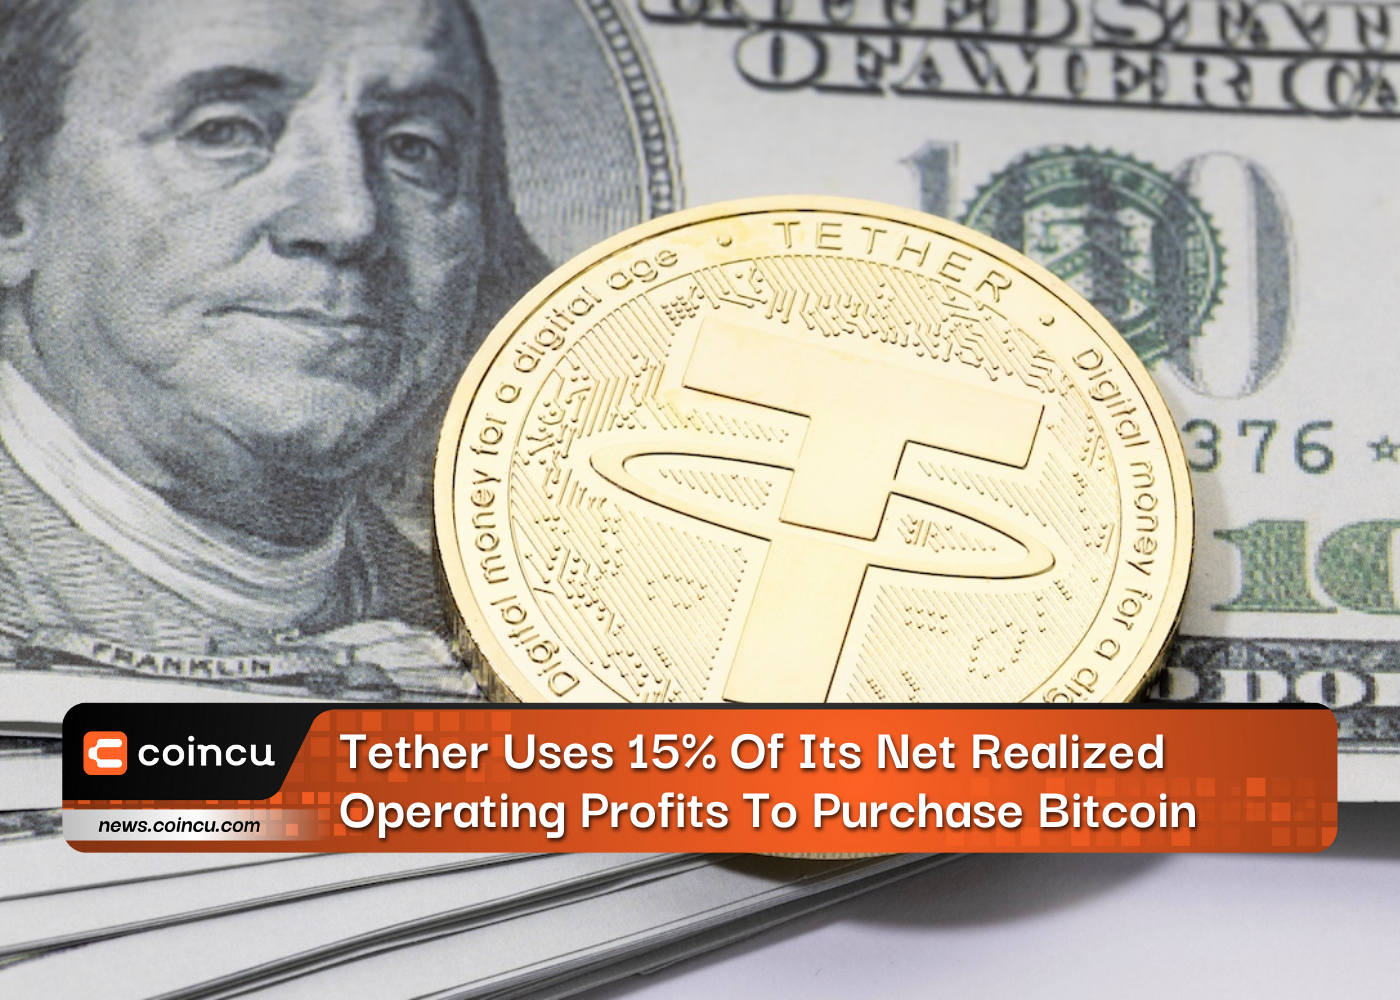 Tether Uses 15% Of Its Net Realized Operating Profits To Purchase Bitcoin